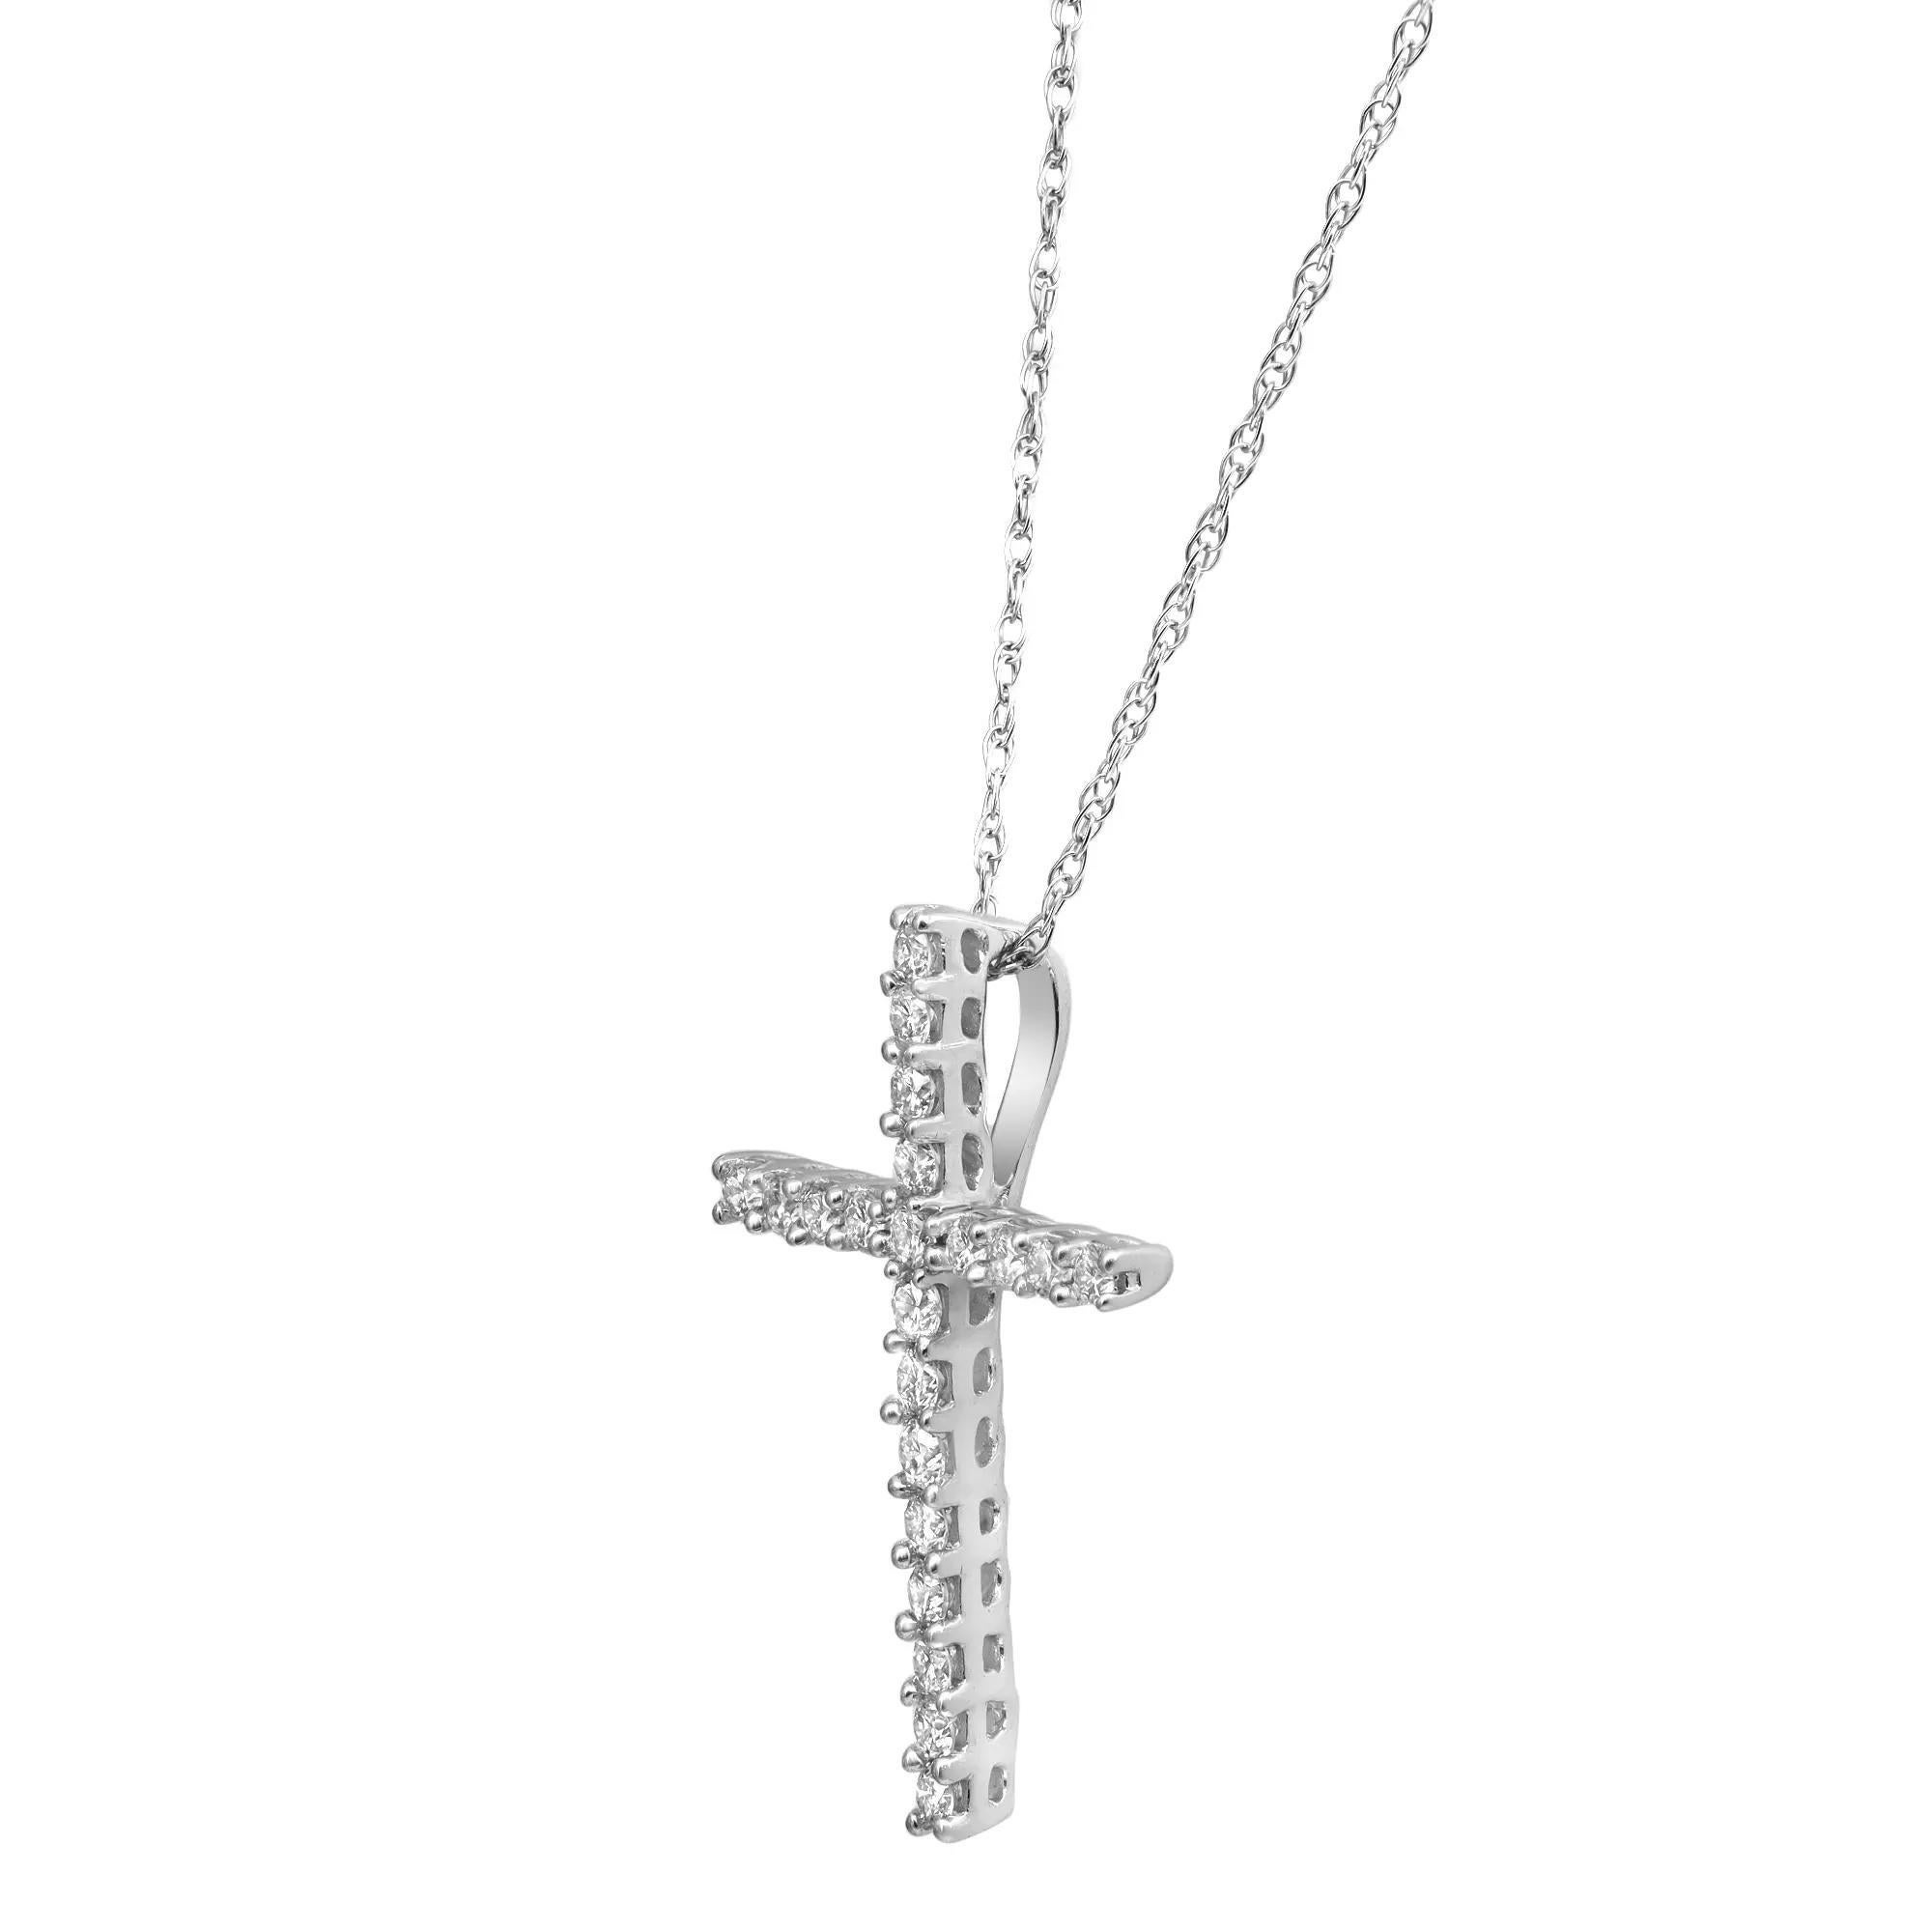 This gorgeous diamond cross pendant is encrusted with 22 round brilliant cut diamonds weighing 0.25 carat. The Diamonds are very sparkly and of high quality beautifully set in a prong setting. Diamond color H-I Color and VS-SI Clarity. Crafted in